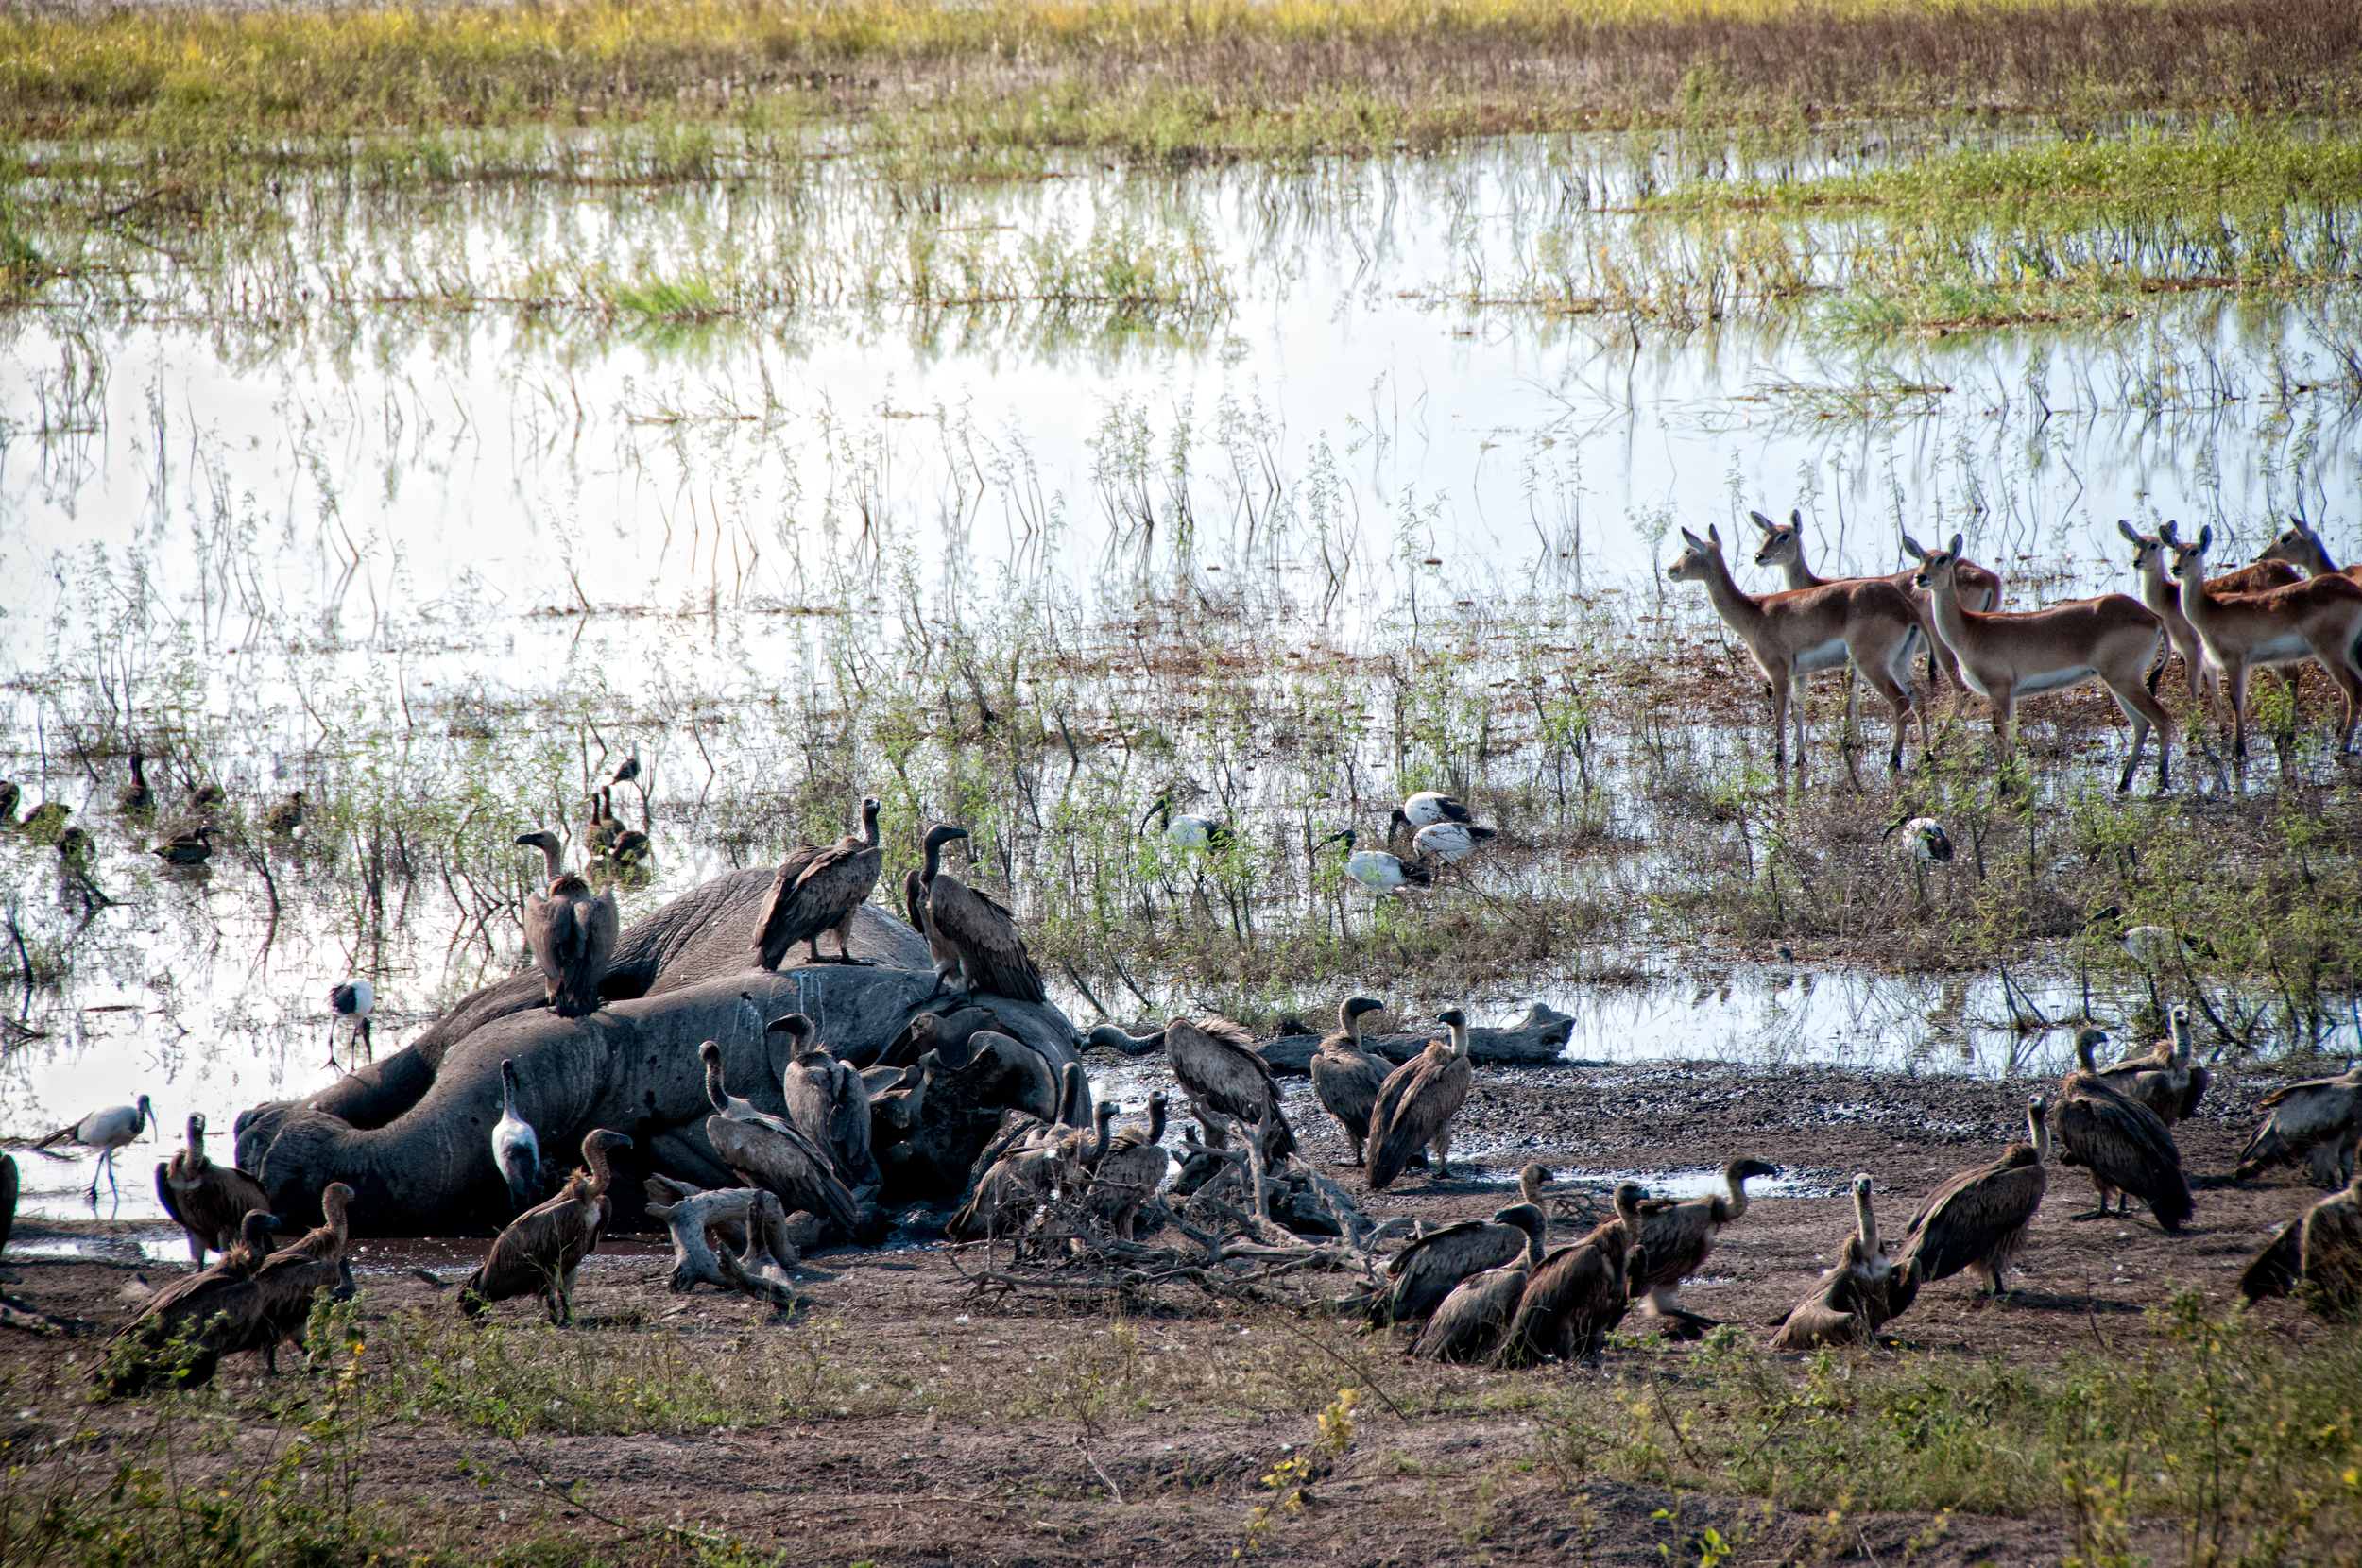 Elephant Carcass, with Vultures. Chobe River